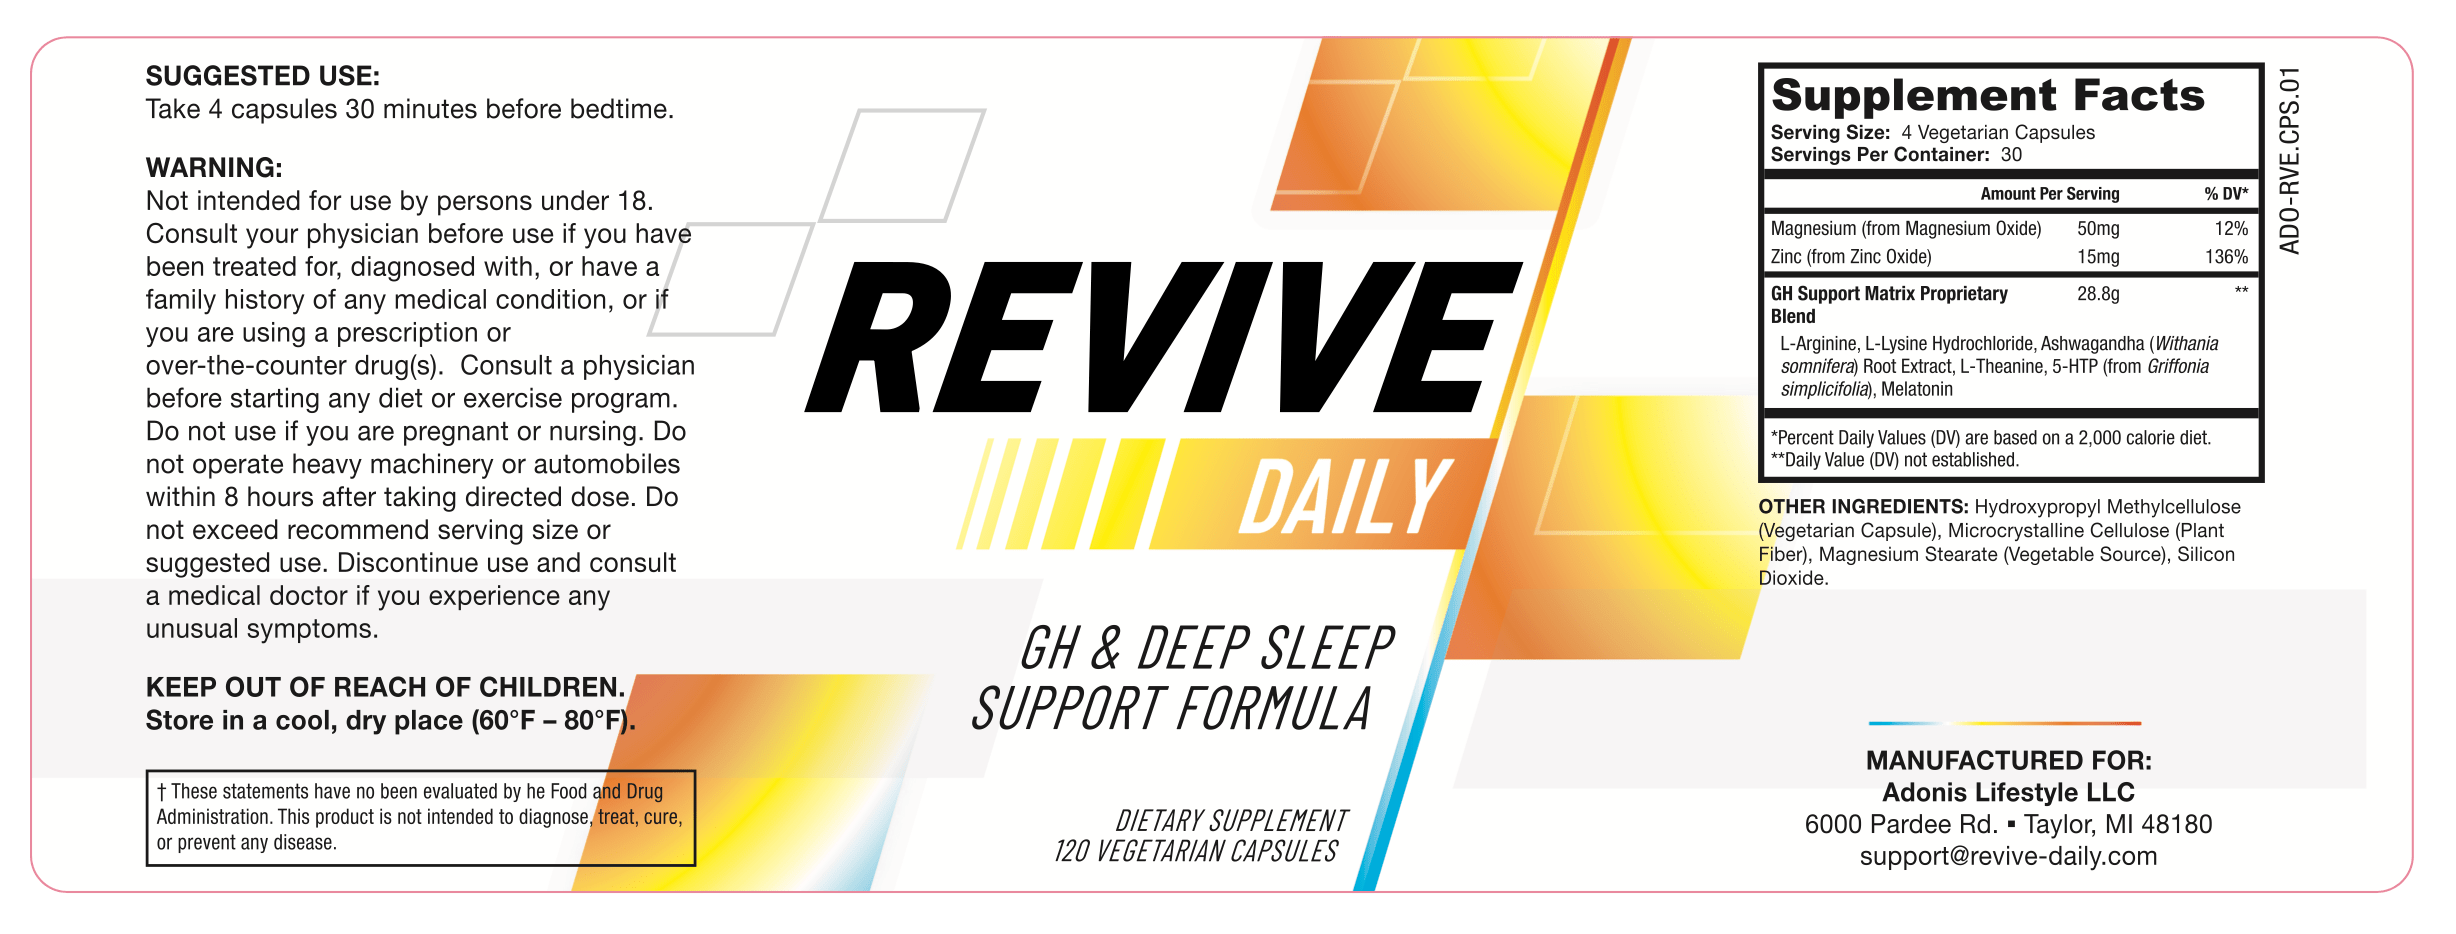 Revive Daily Supplement Label